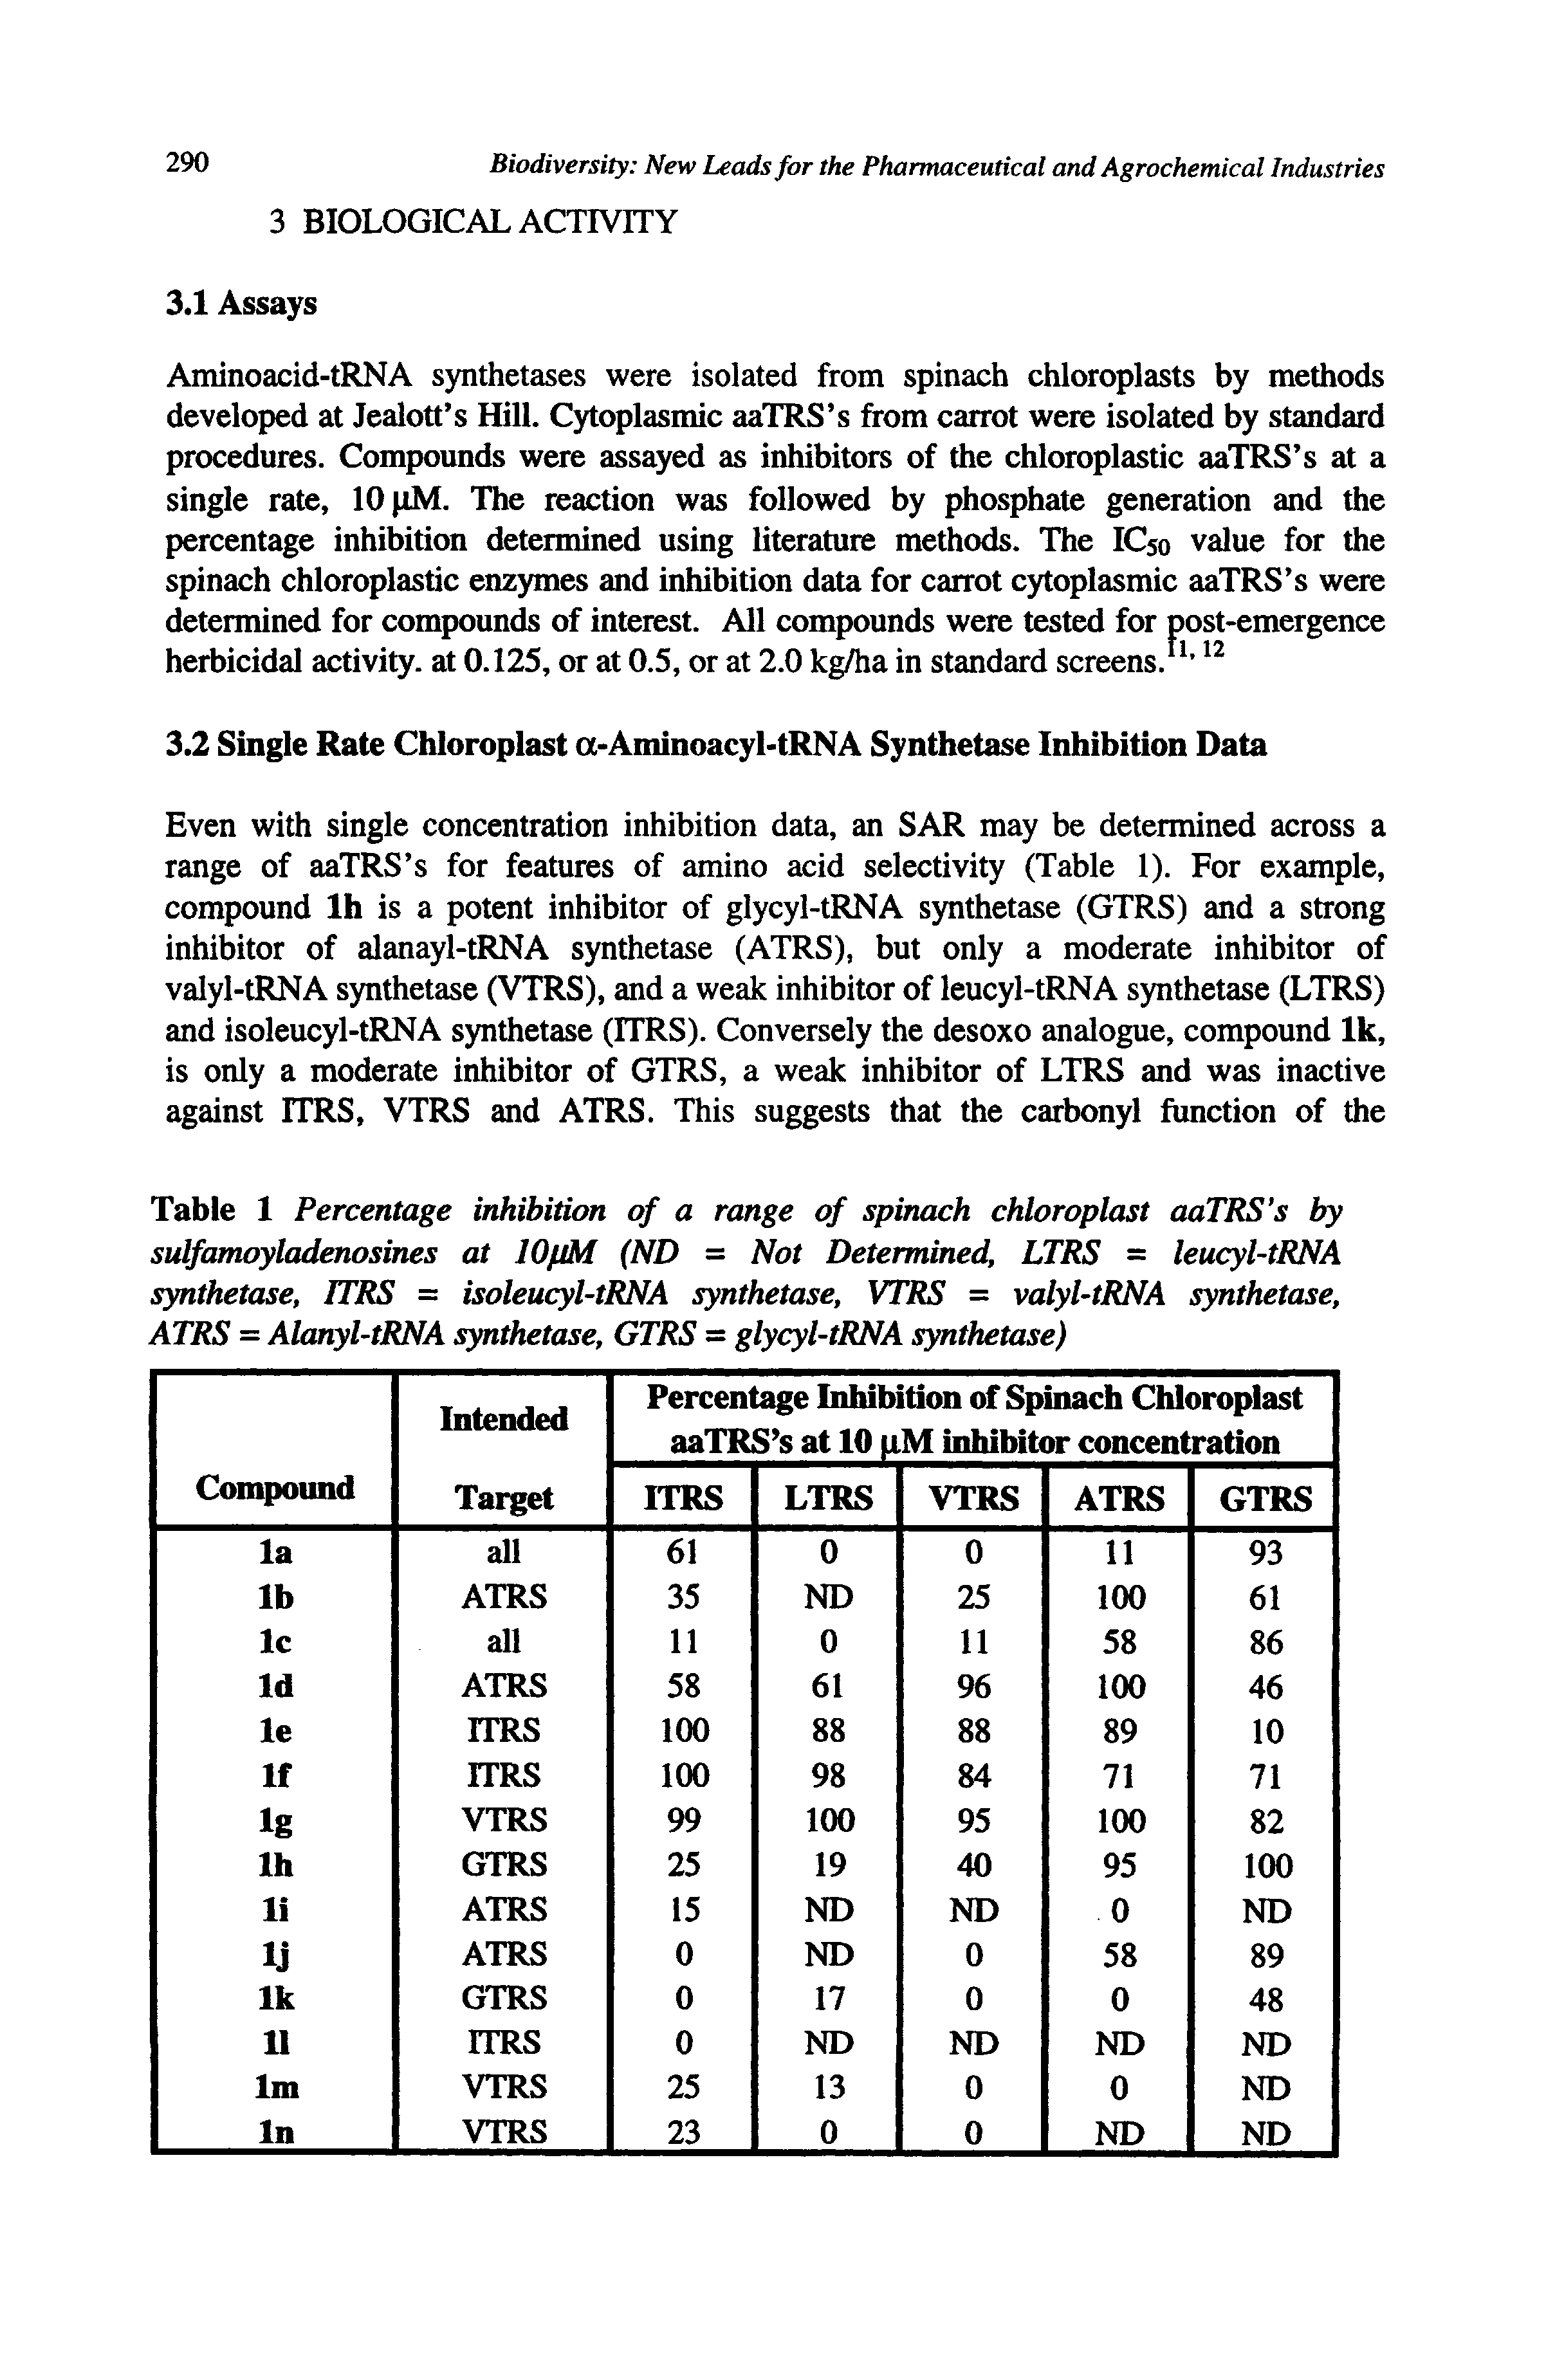 Table 1 Percentage inhibition of a range of spinach chloroplast aaTRS s by sulfamoyladenosines at lOpM (ND = Not Determined, LTRS = leucyl-tRNA synthetase, ITRS = isoleucyl-tRNA synthetase, VTRS = valyl-tRNA synthetase, ATRS = Alanyl-tRNA synthetase, GTRS = glycyl-tRNA synthetase)...